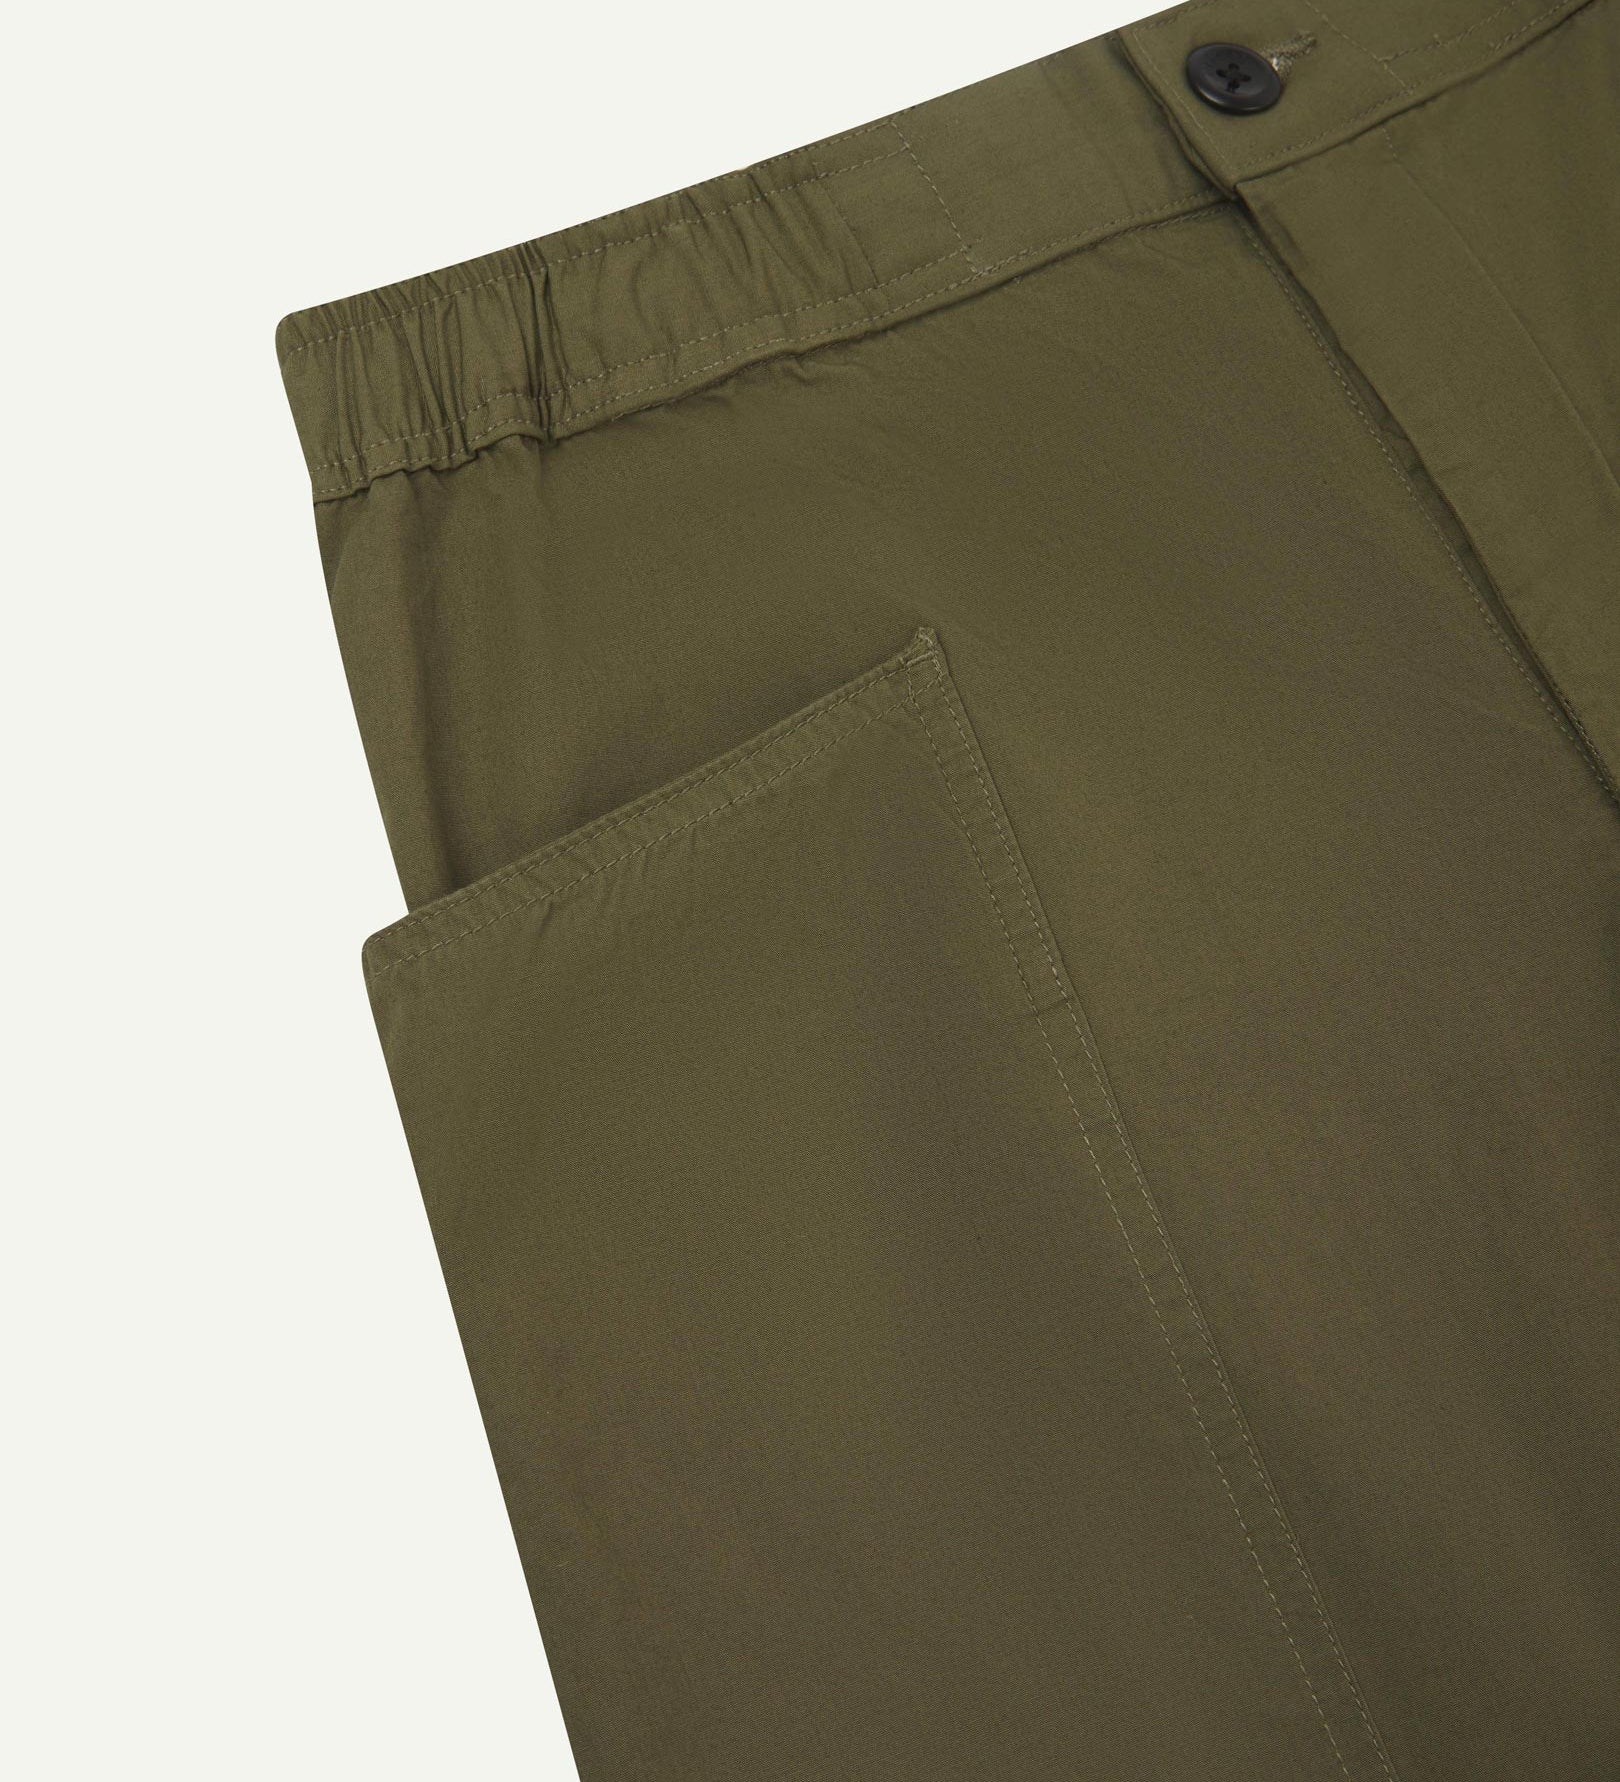 Close angled view of the elasticated waist and corozo button fastening and pockets of the olive green 5011 Uskees pants.